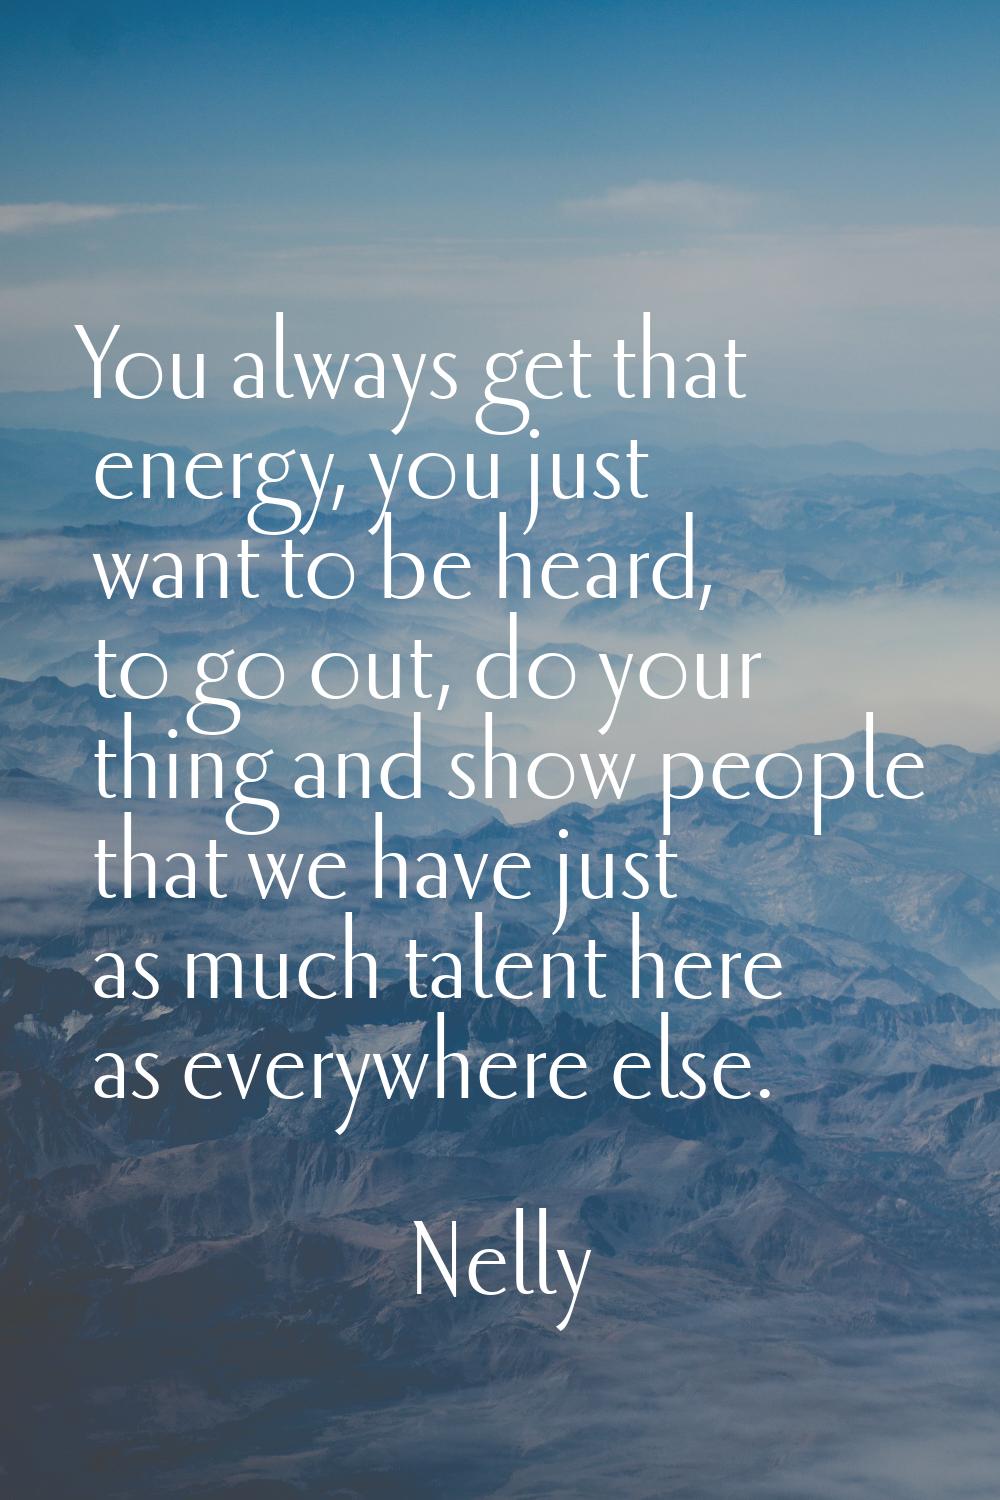 You always get that energy, you just want to be heard, to go out, do your thing and show people tha